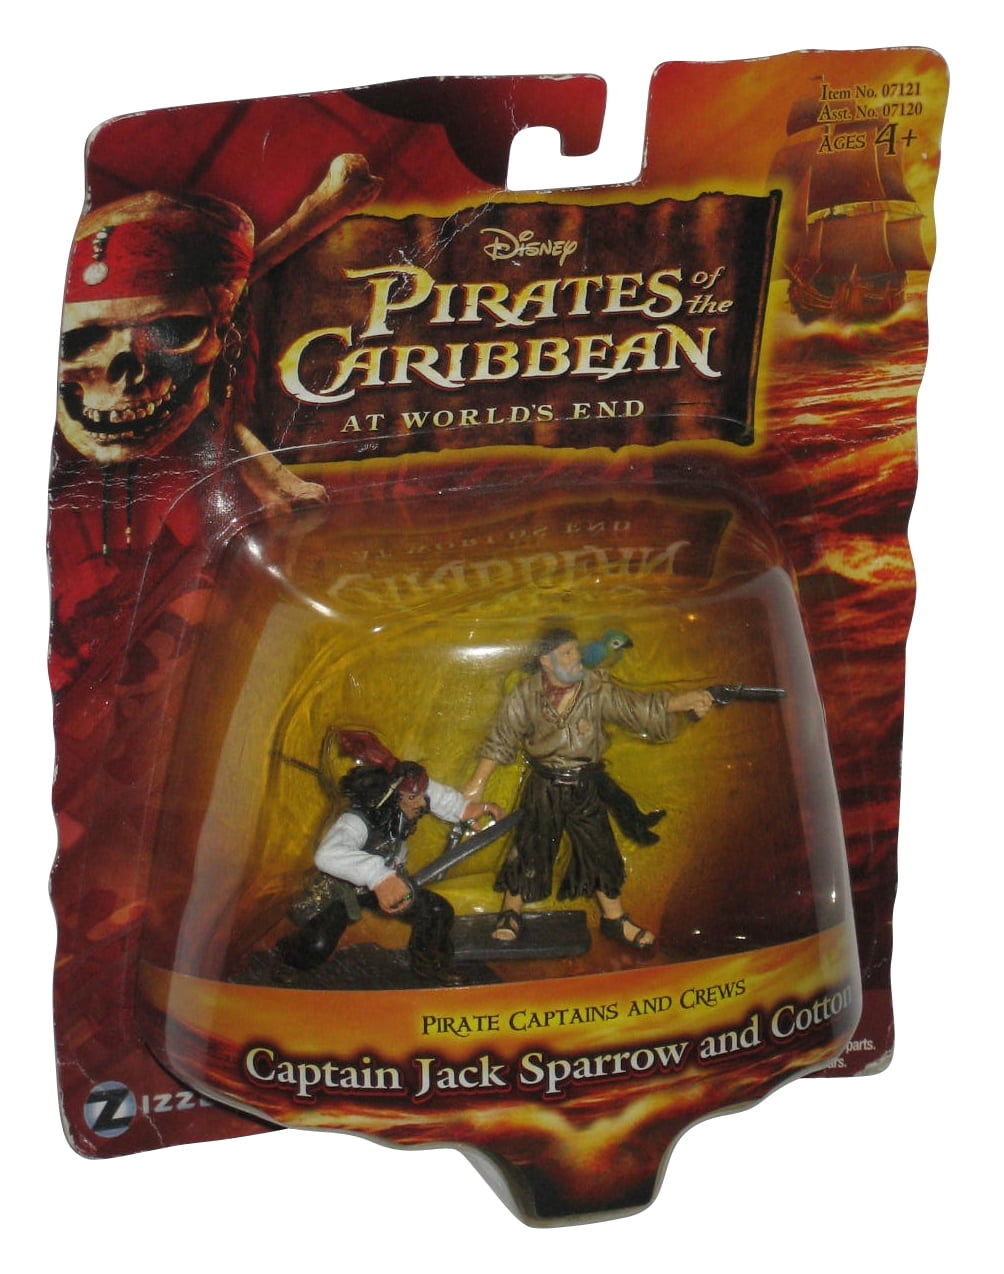 Pirates Of The Caribbean At Worlds End Zizzle Figure Set Captains And Crews Jack Sparrow